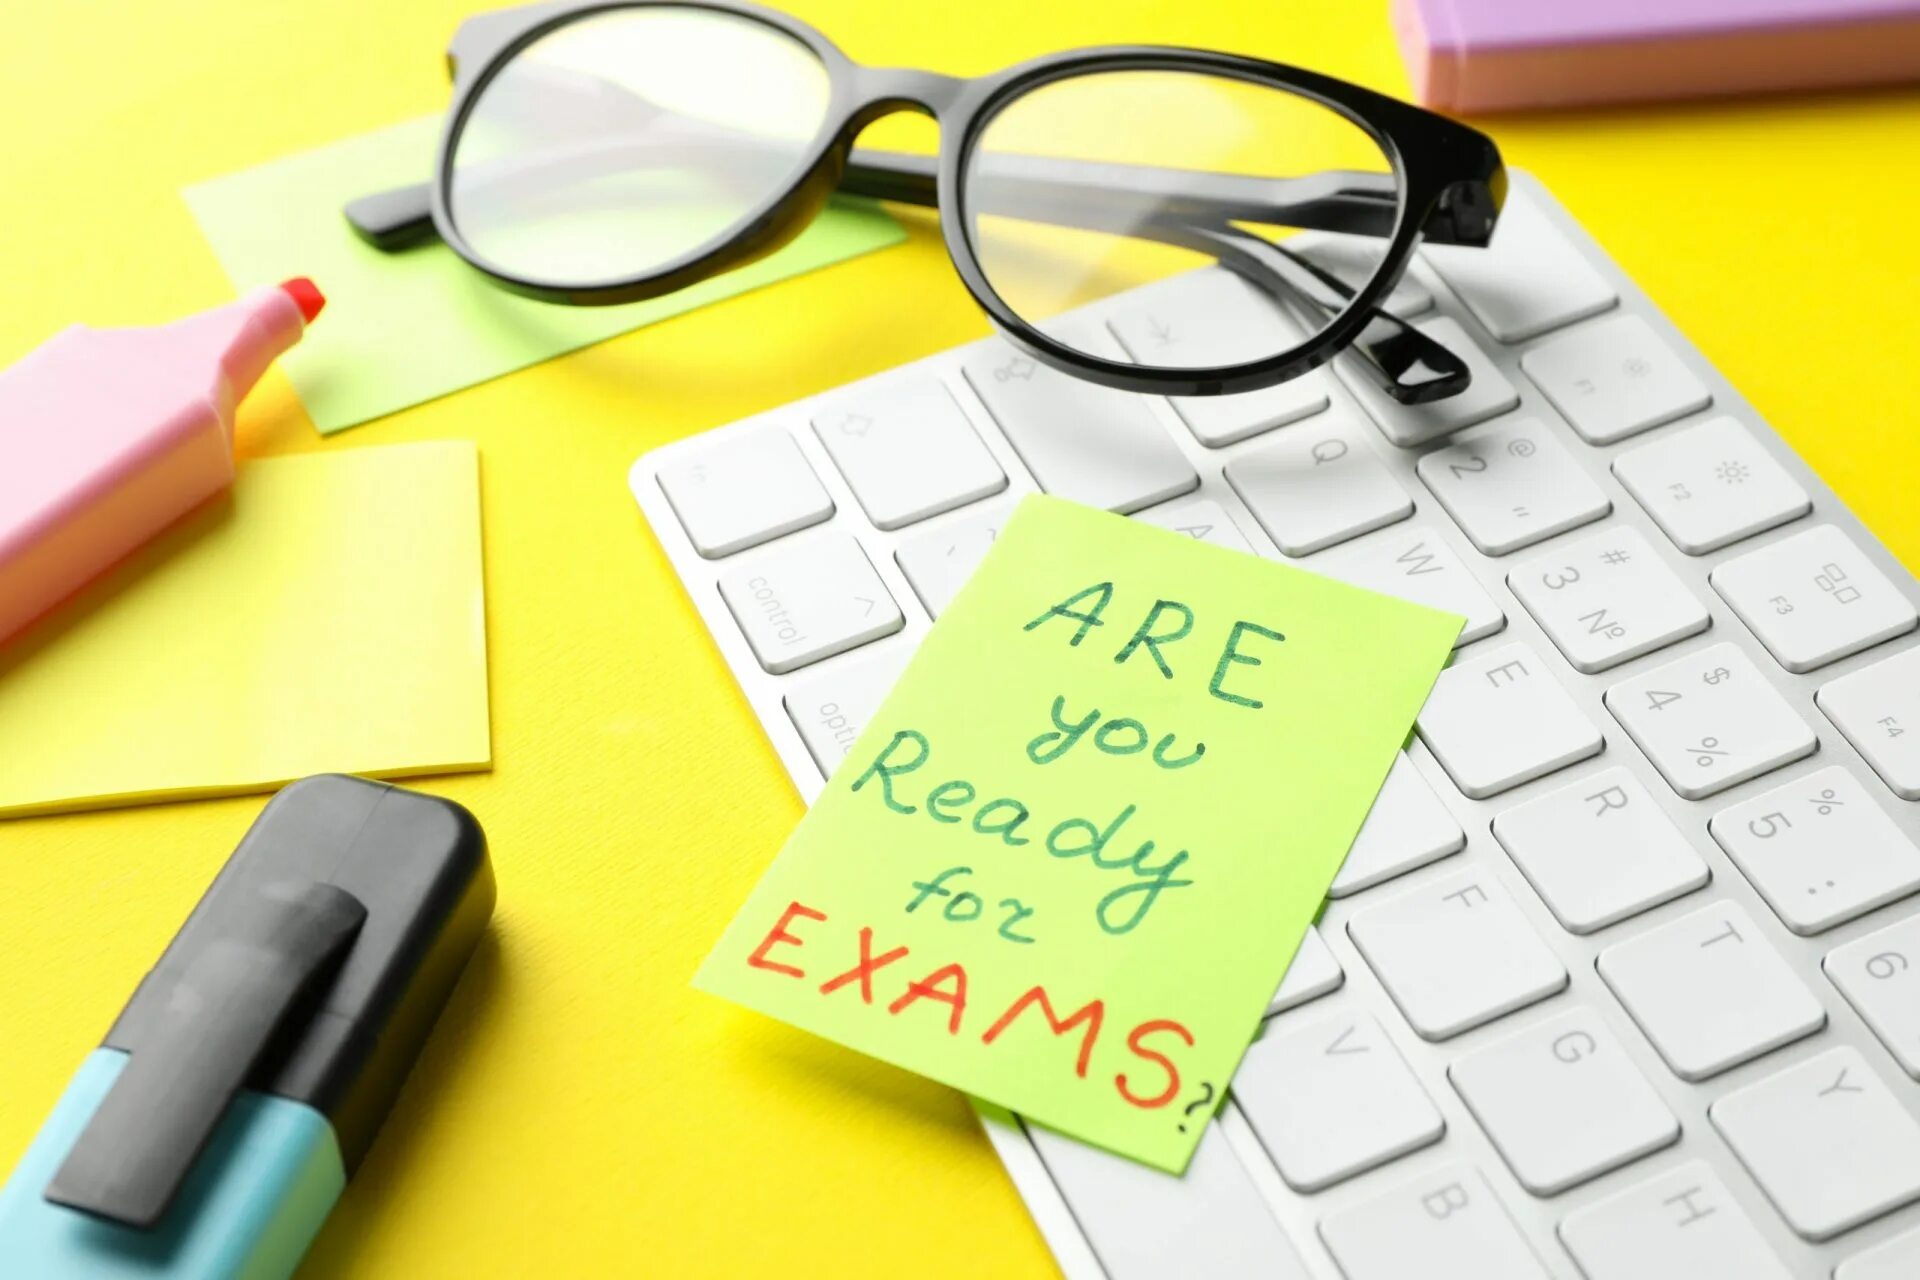 Ready for exams. Are you ready for Exams на белом фоне картинки. Exams on. Get ready for Exam. Ready for Exam poster.